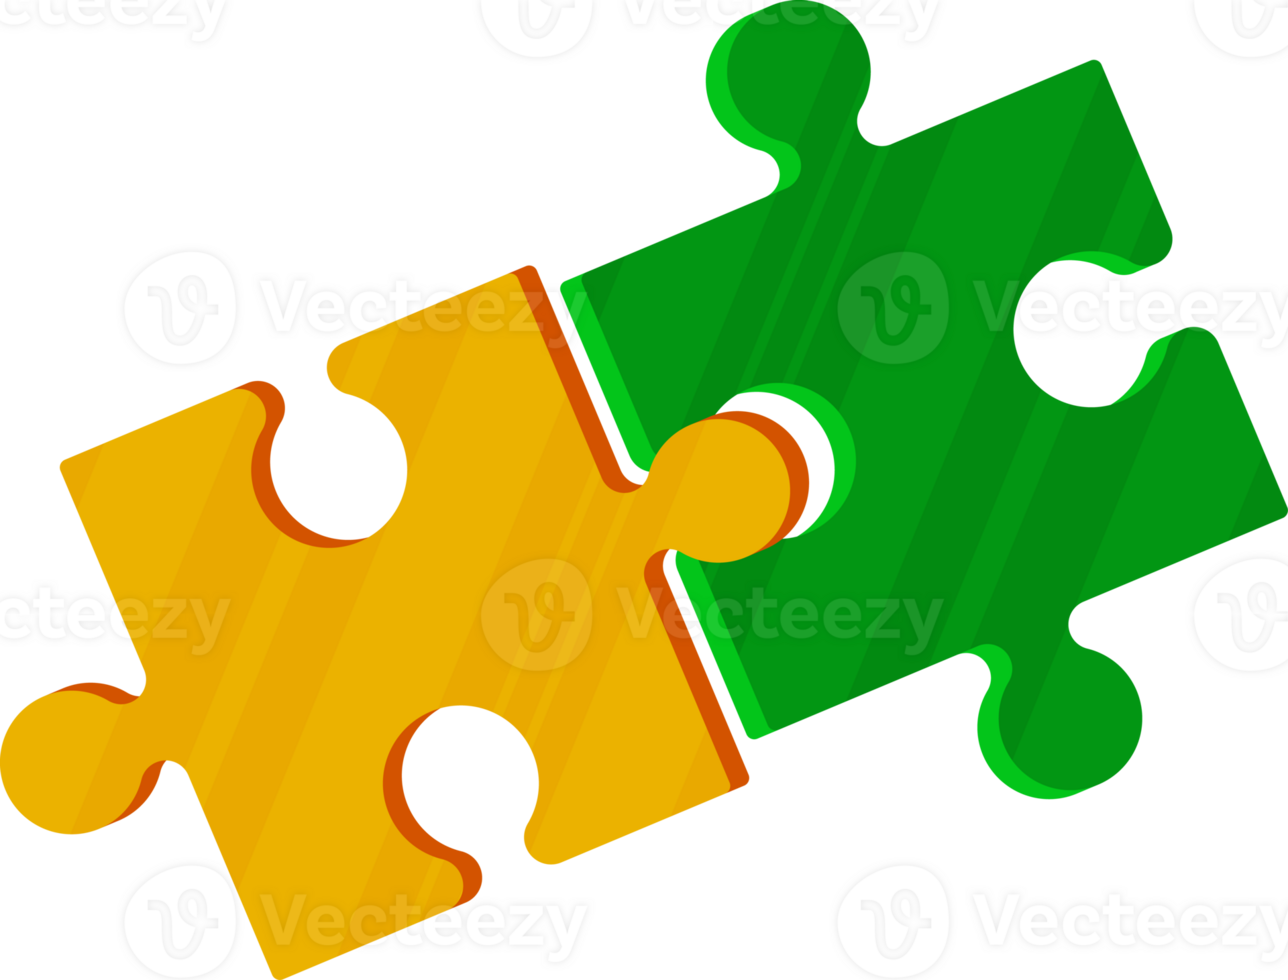 Connecting Puzzle Pieces. Symbol of Teamwork png